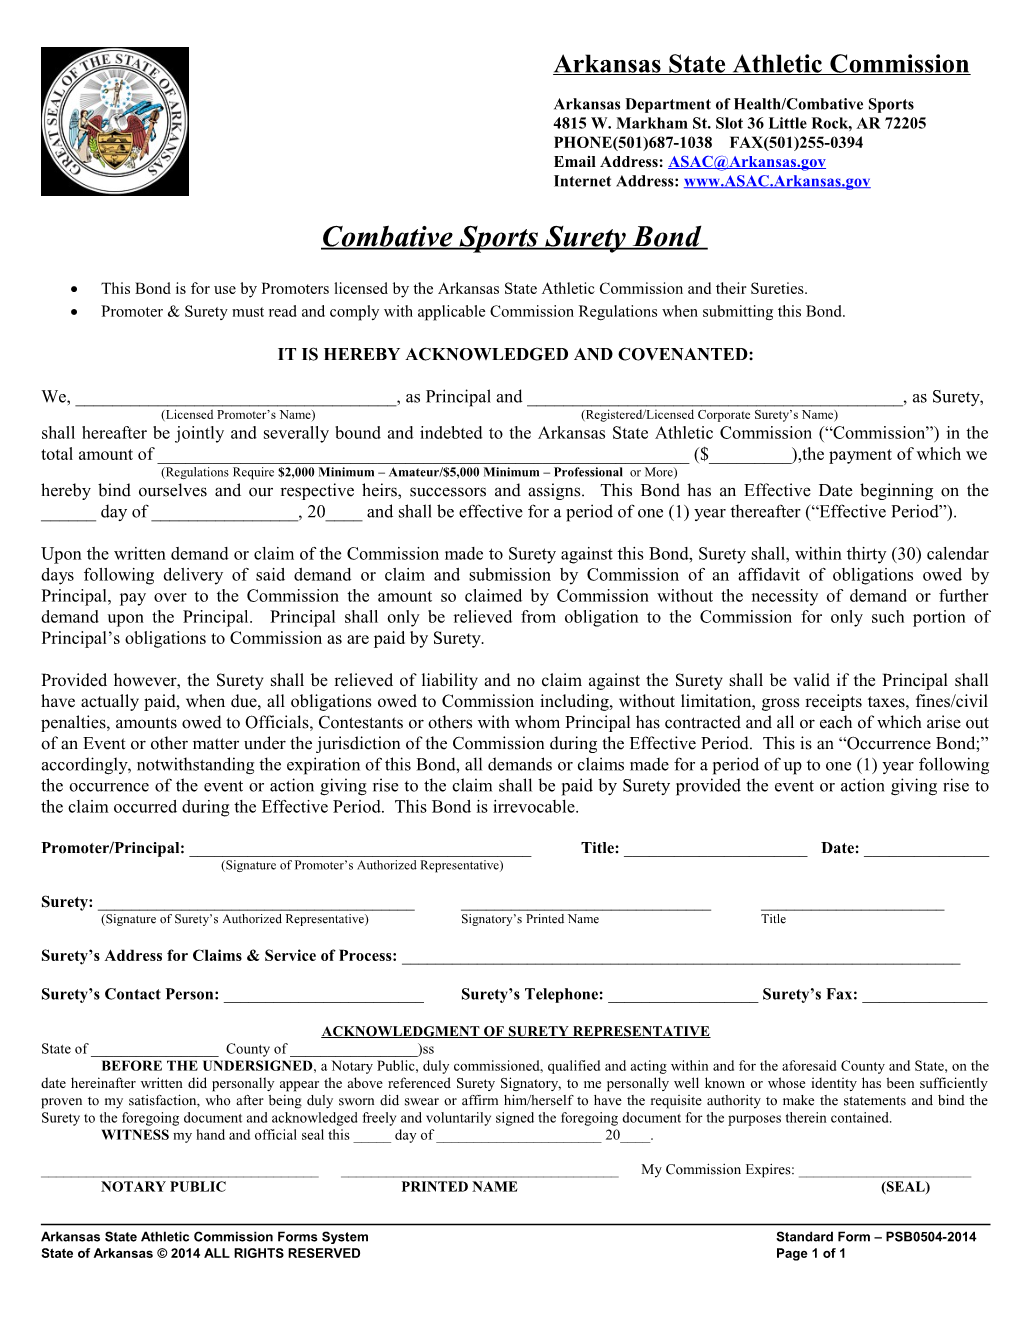 Arkansas State Athletic Commission Forms Systemstandard Form PSB0504-2014